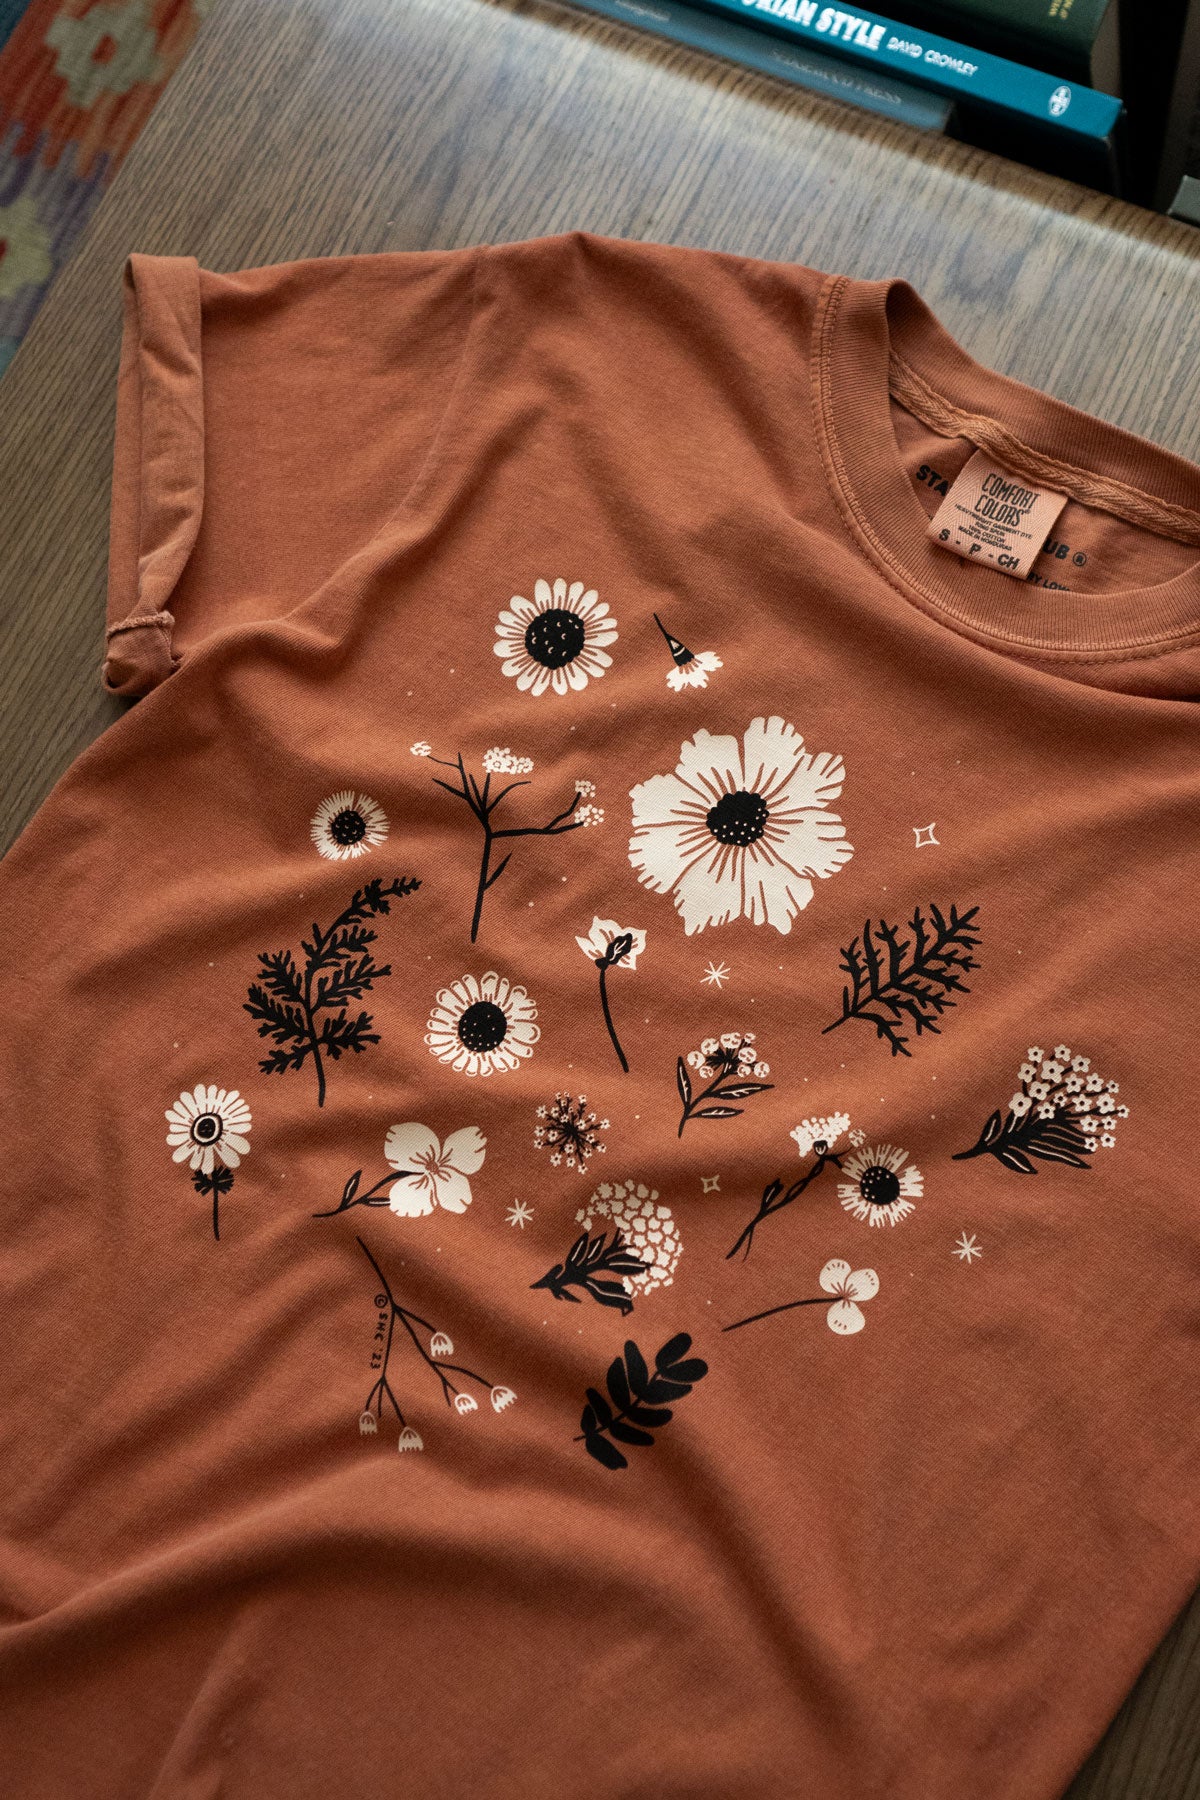 Pressed Flowers - Comfort Colors® T-Shirt